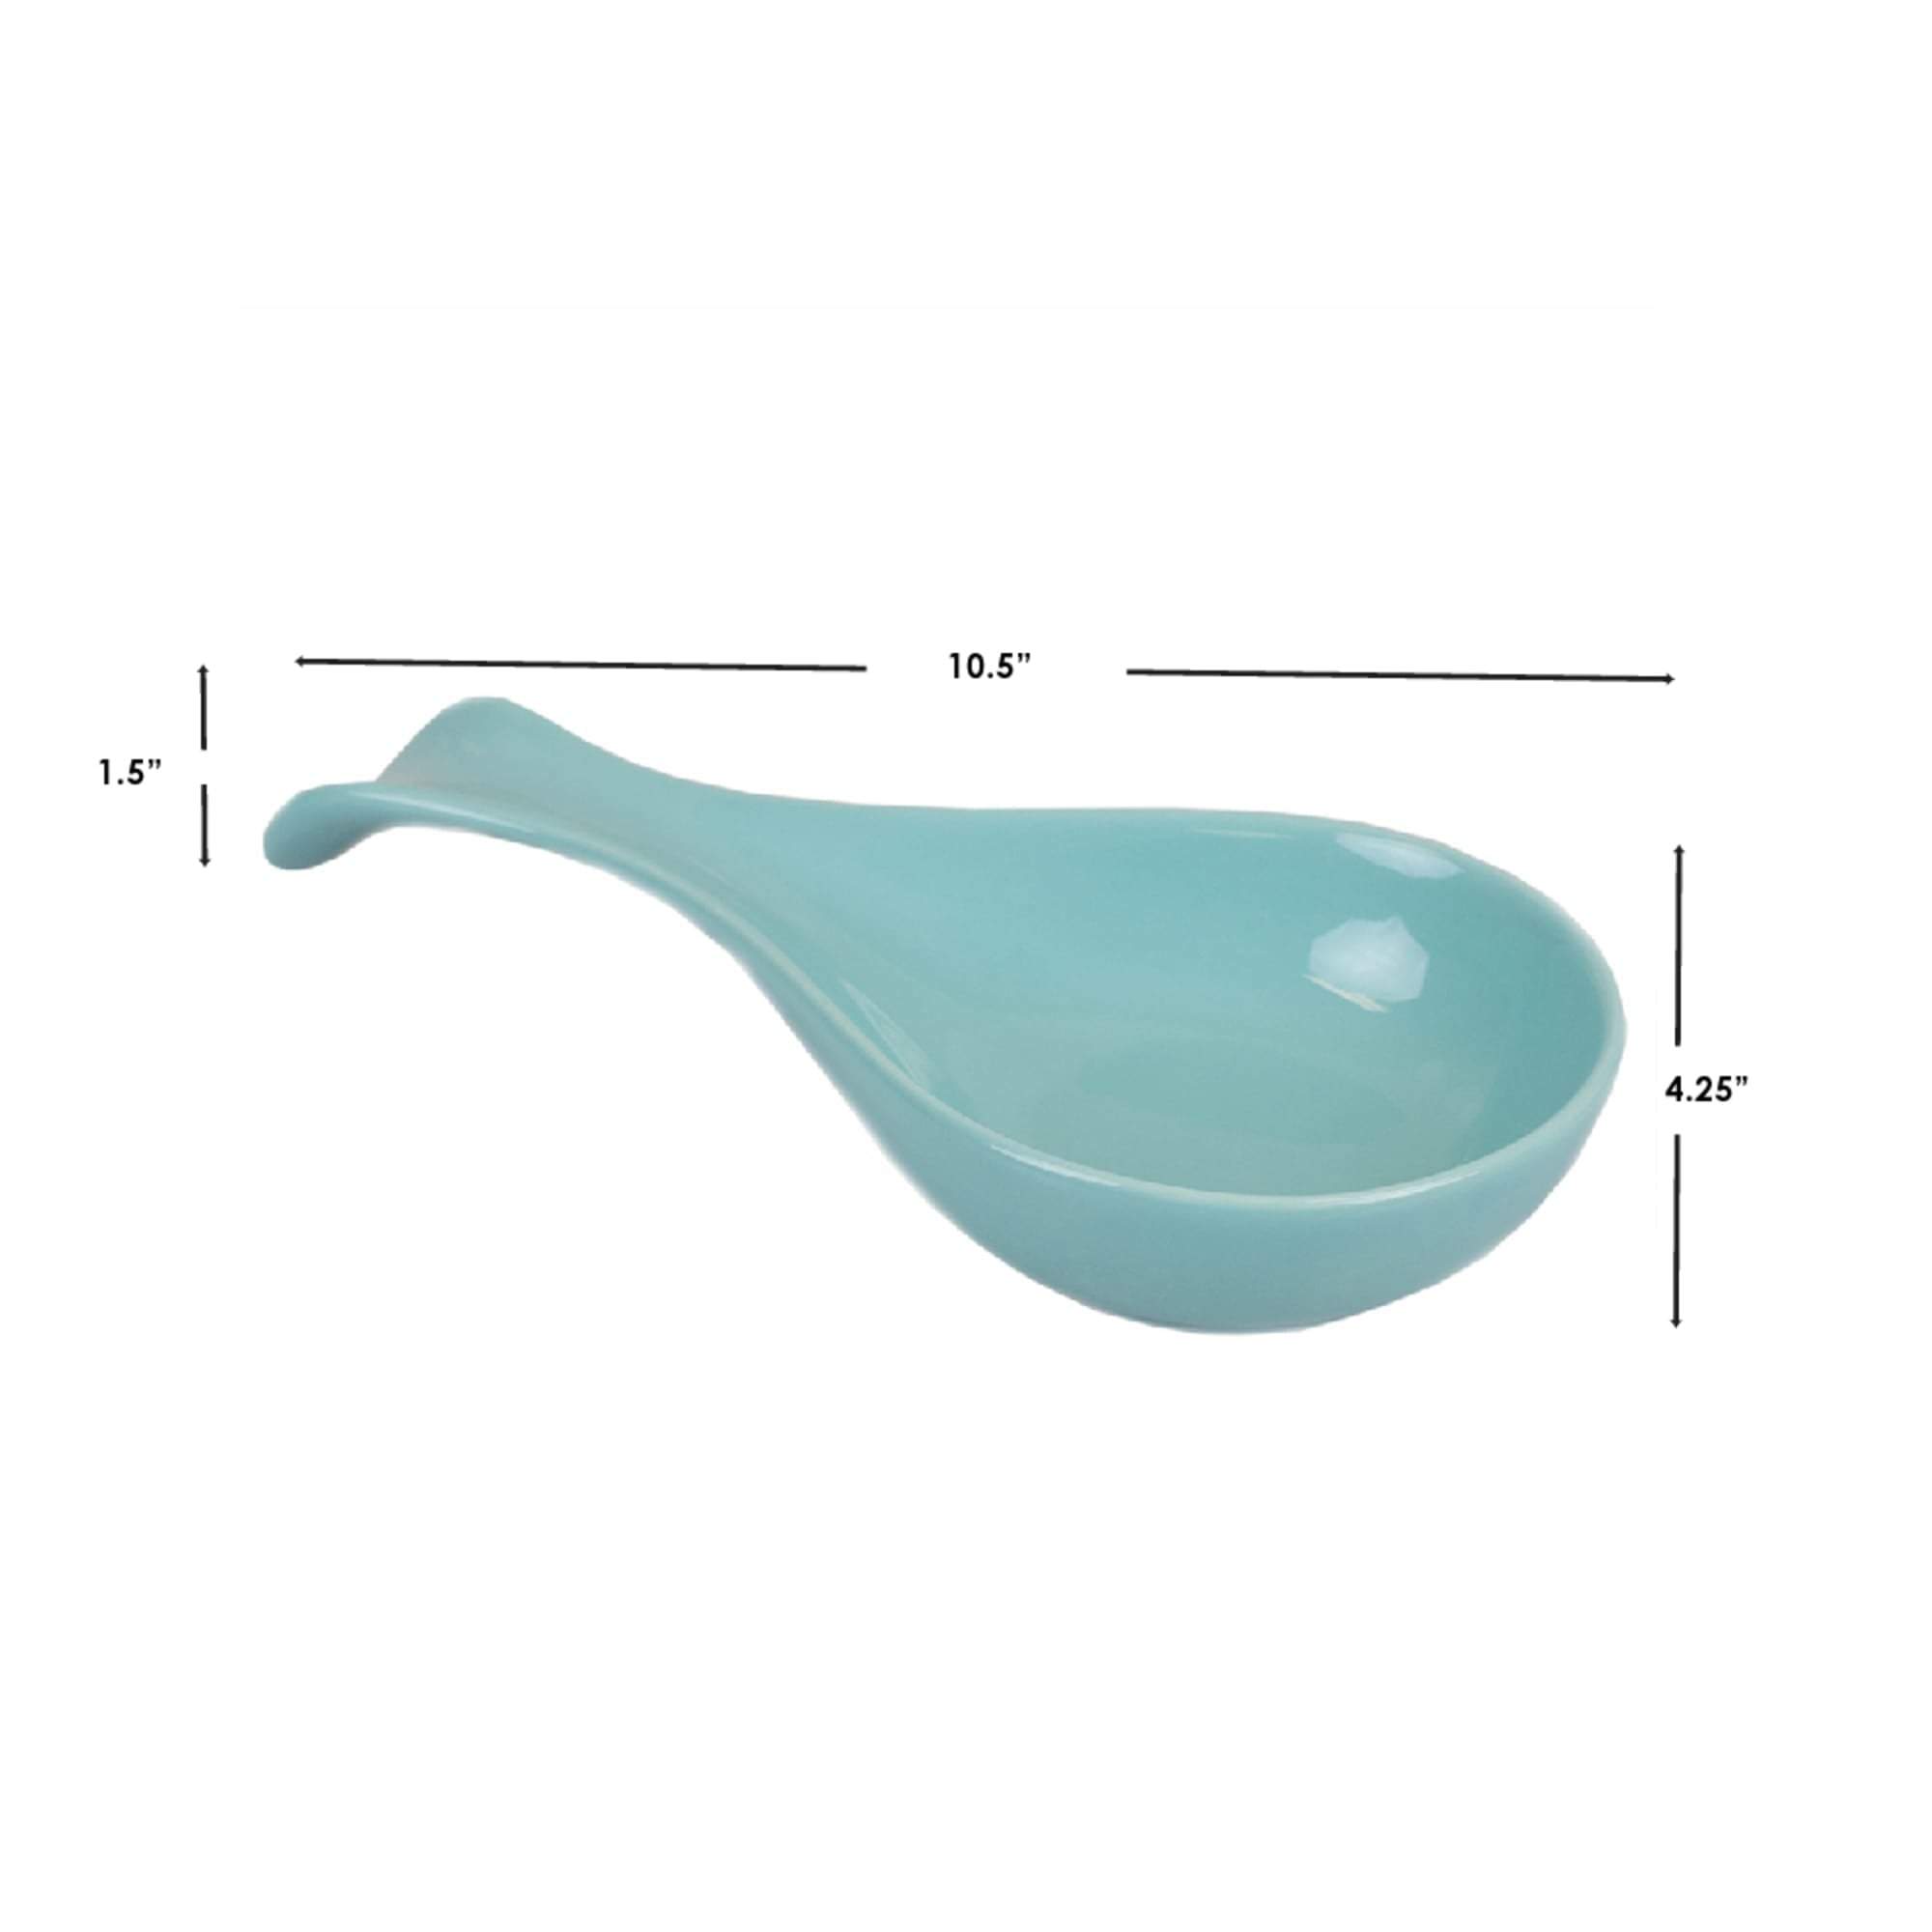 Home Basics Ceramic Spoon Rest, Turquoise $4.00 EACH, CASE PACK OF 12